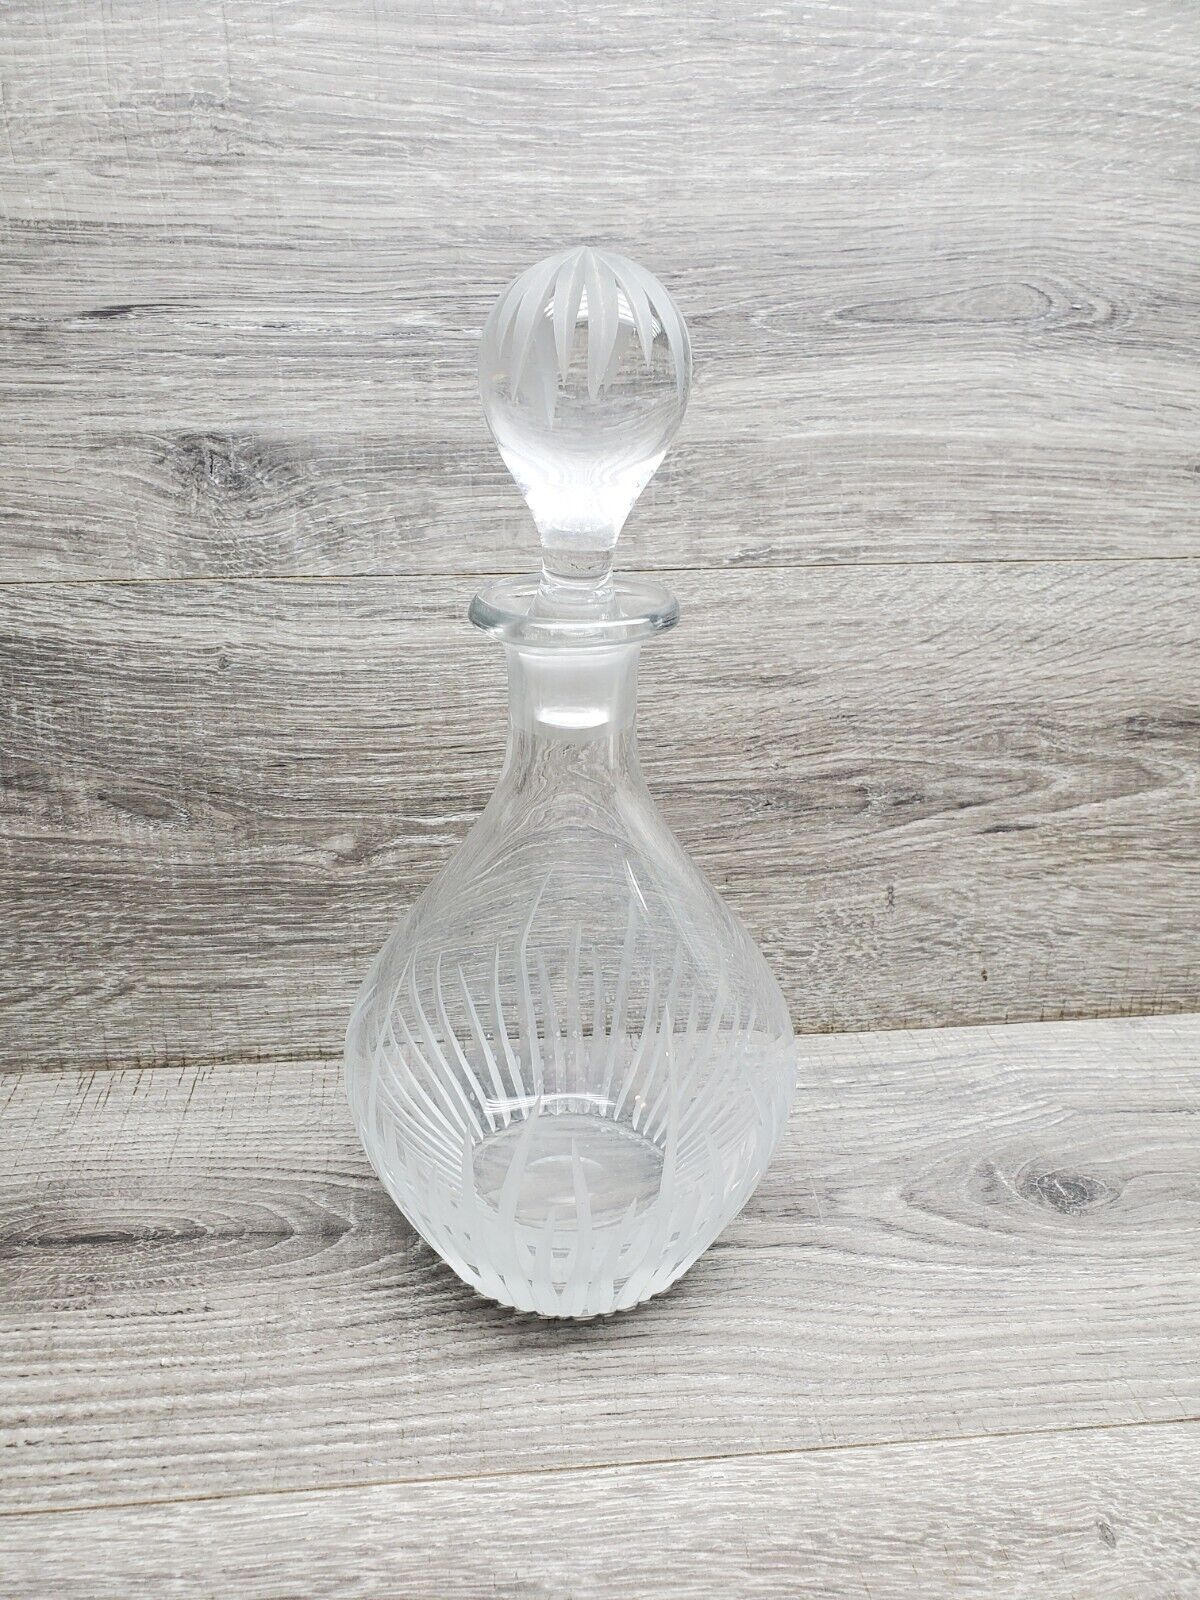 BOHEMIAN HAND CUT CRYSTAL  DECANTER EXCELLENT